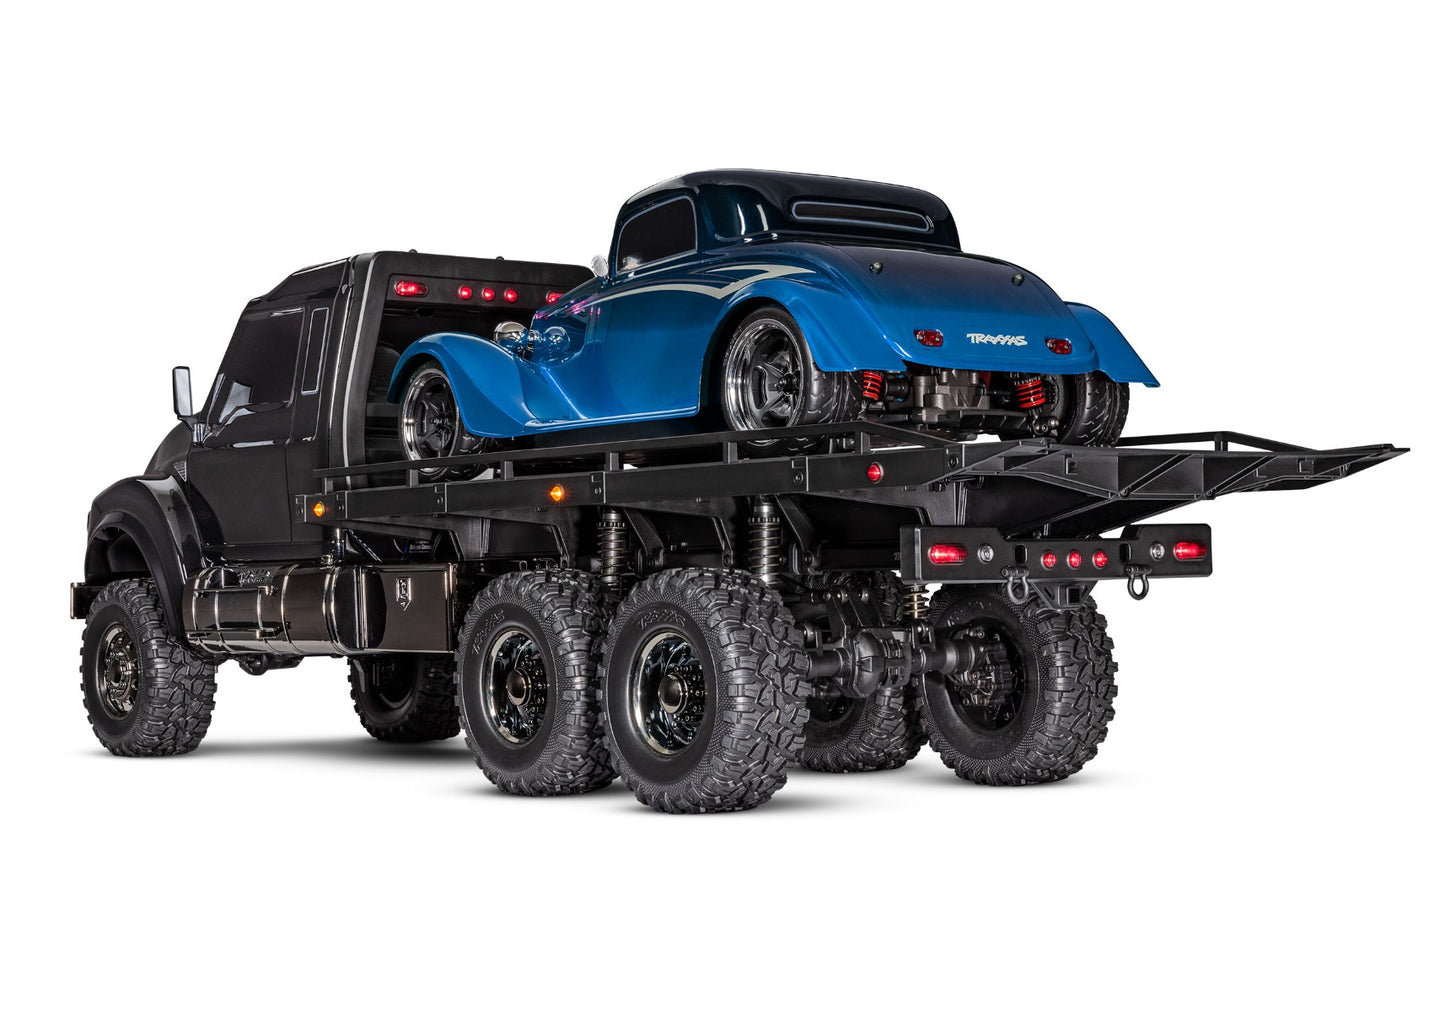 88086-4-BLK TRX-6 Ultimate RC Hauler 6x6 With Winch